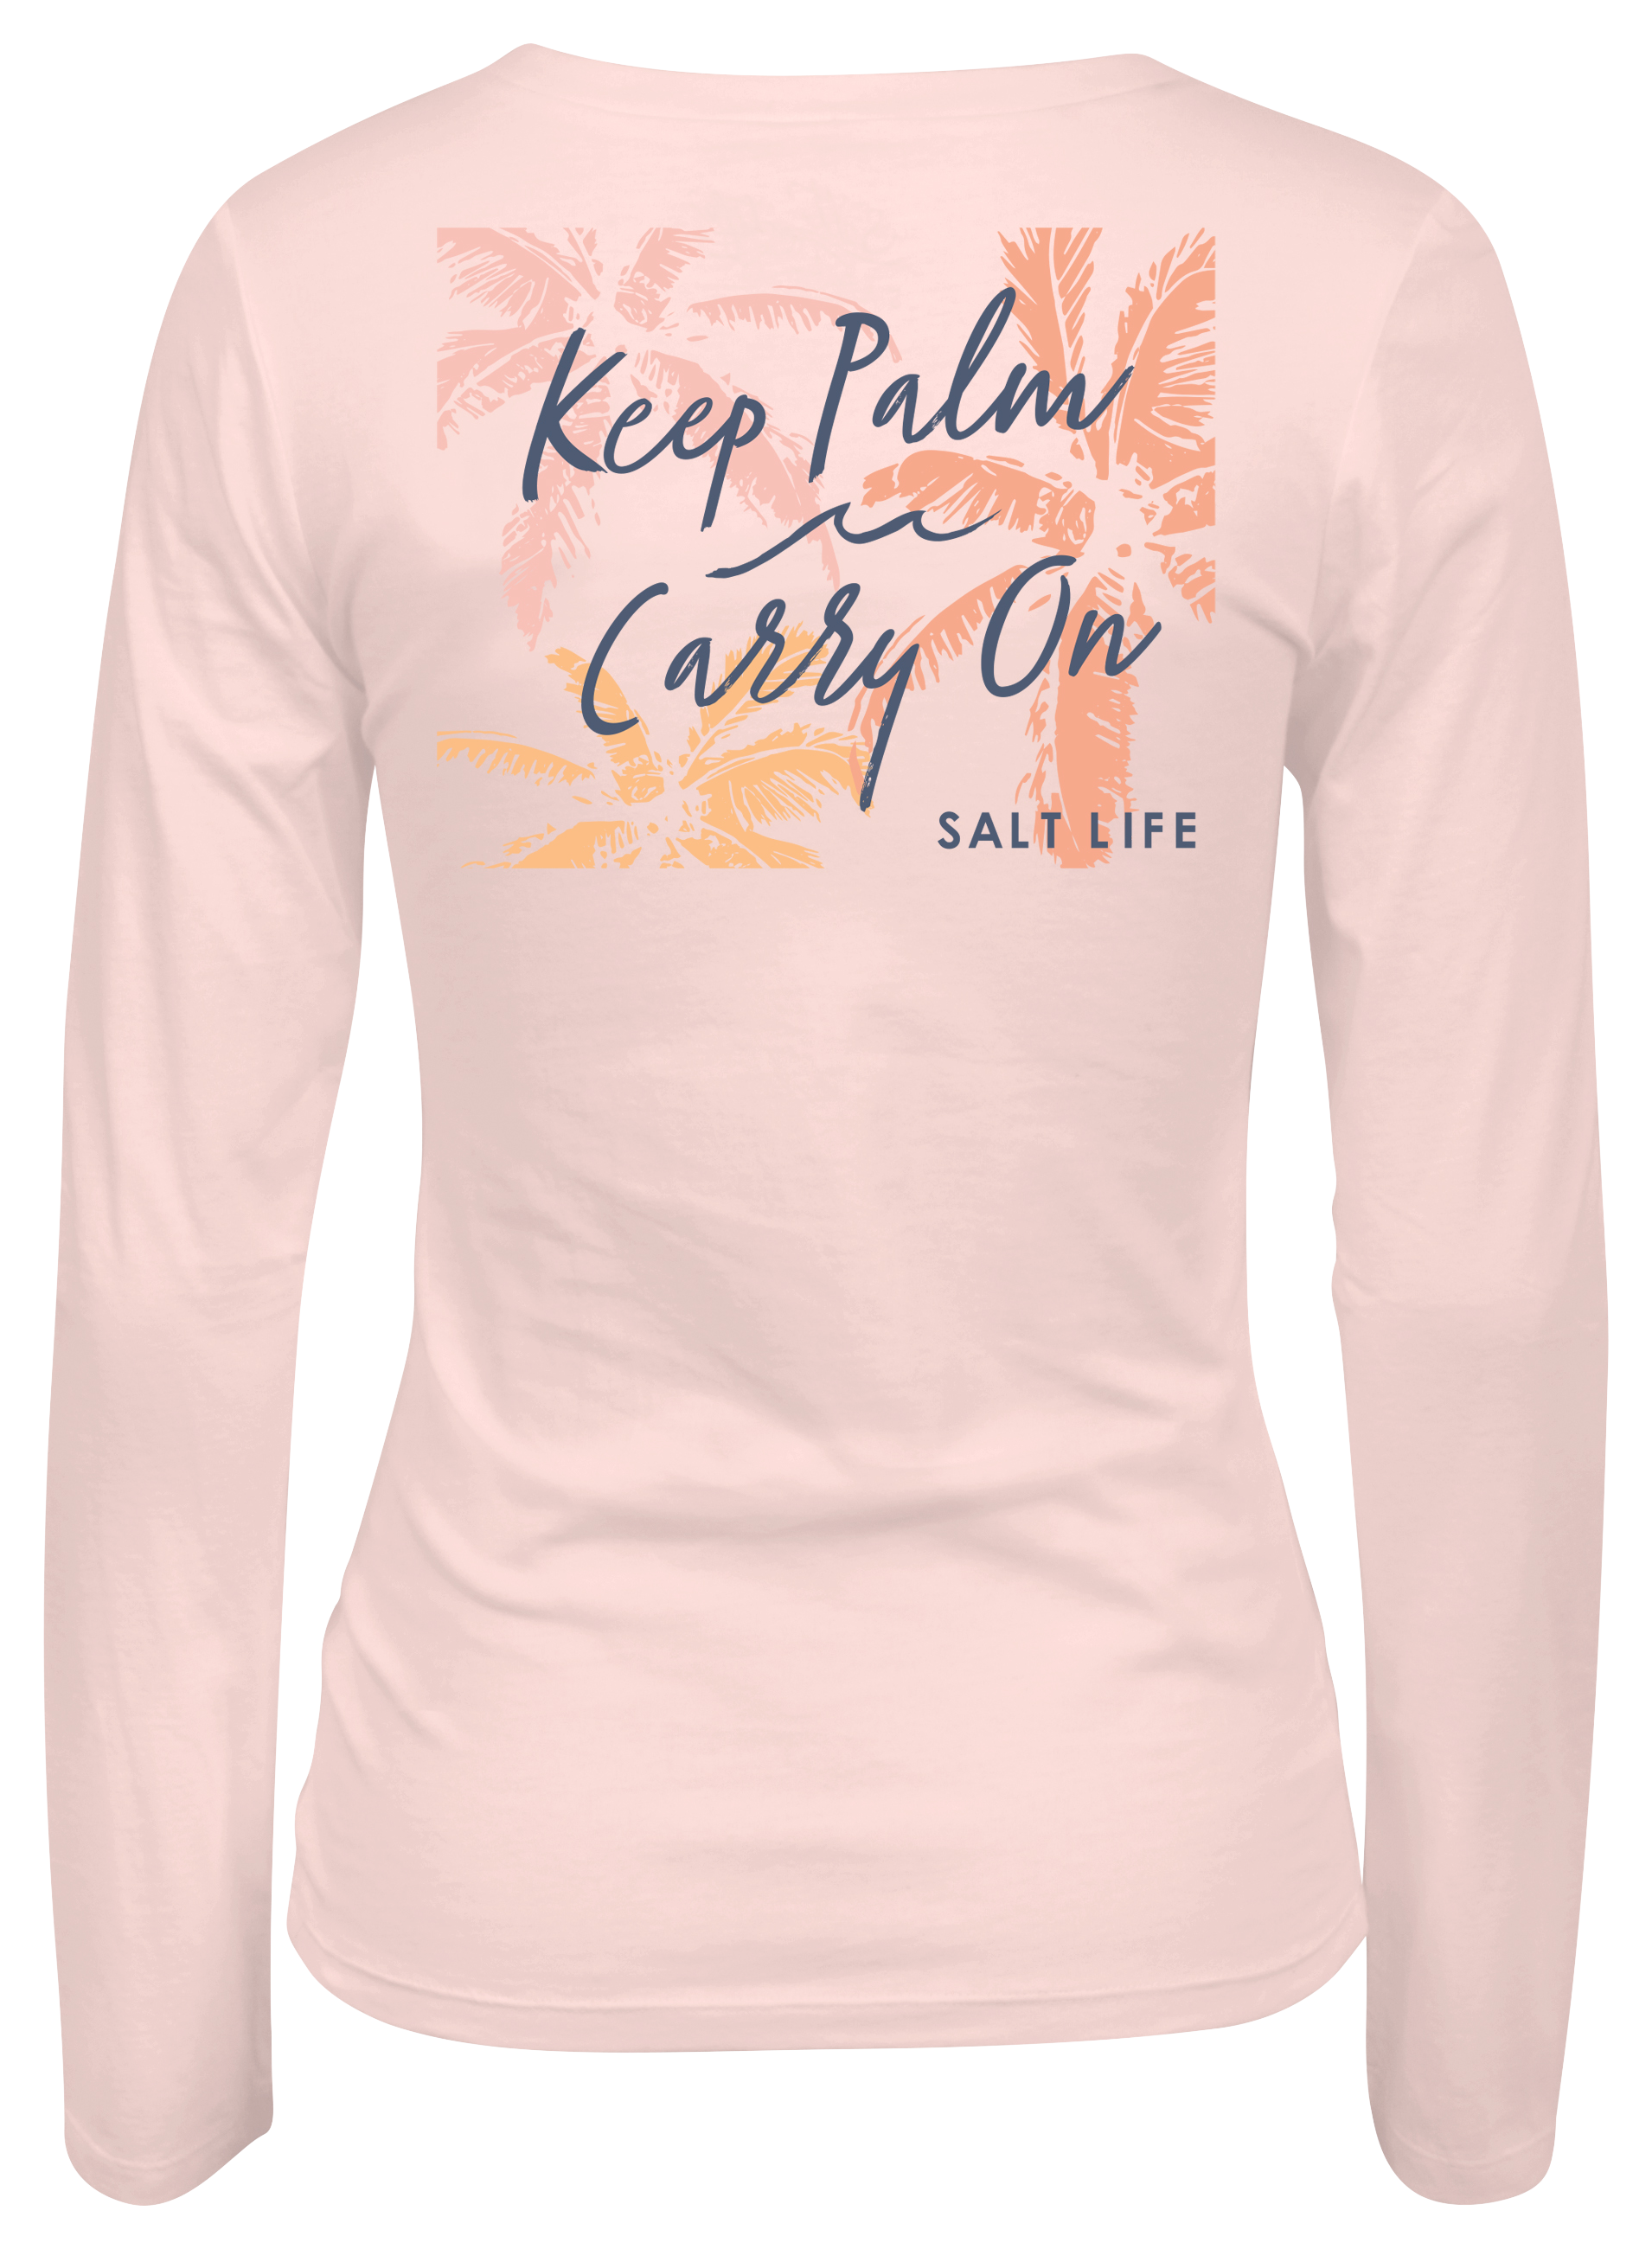 Salt Life Keep Palm Carry On V-Neck Long-Sleeve T-Shirt for Ladies